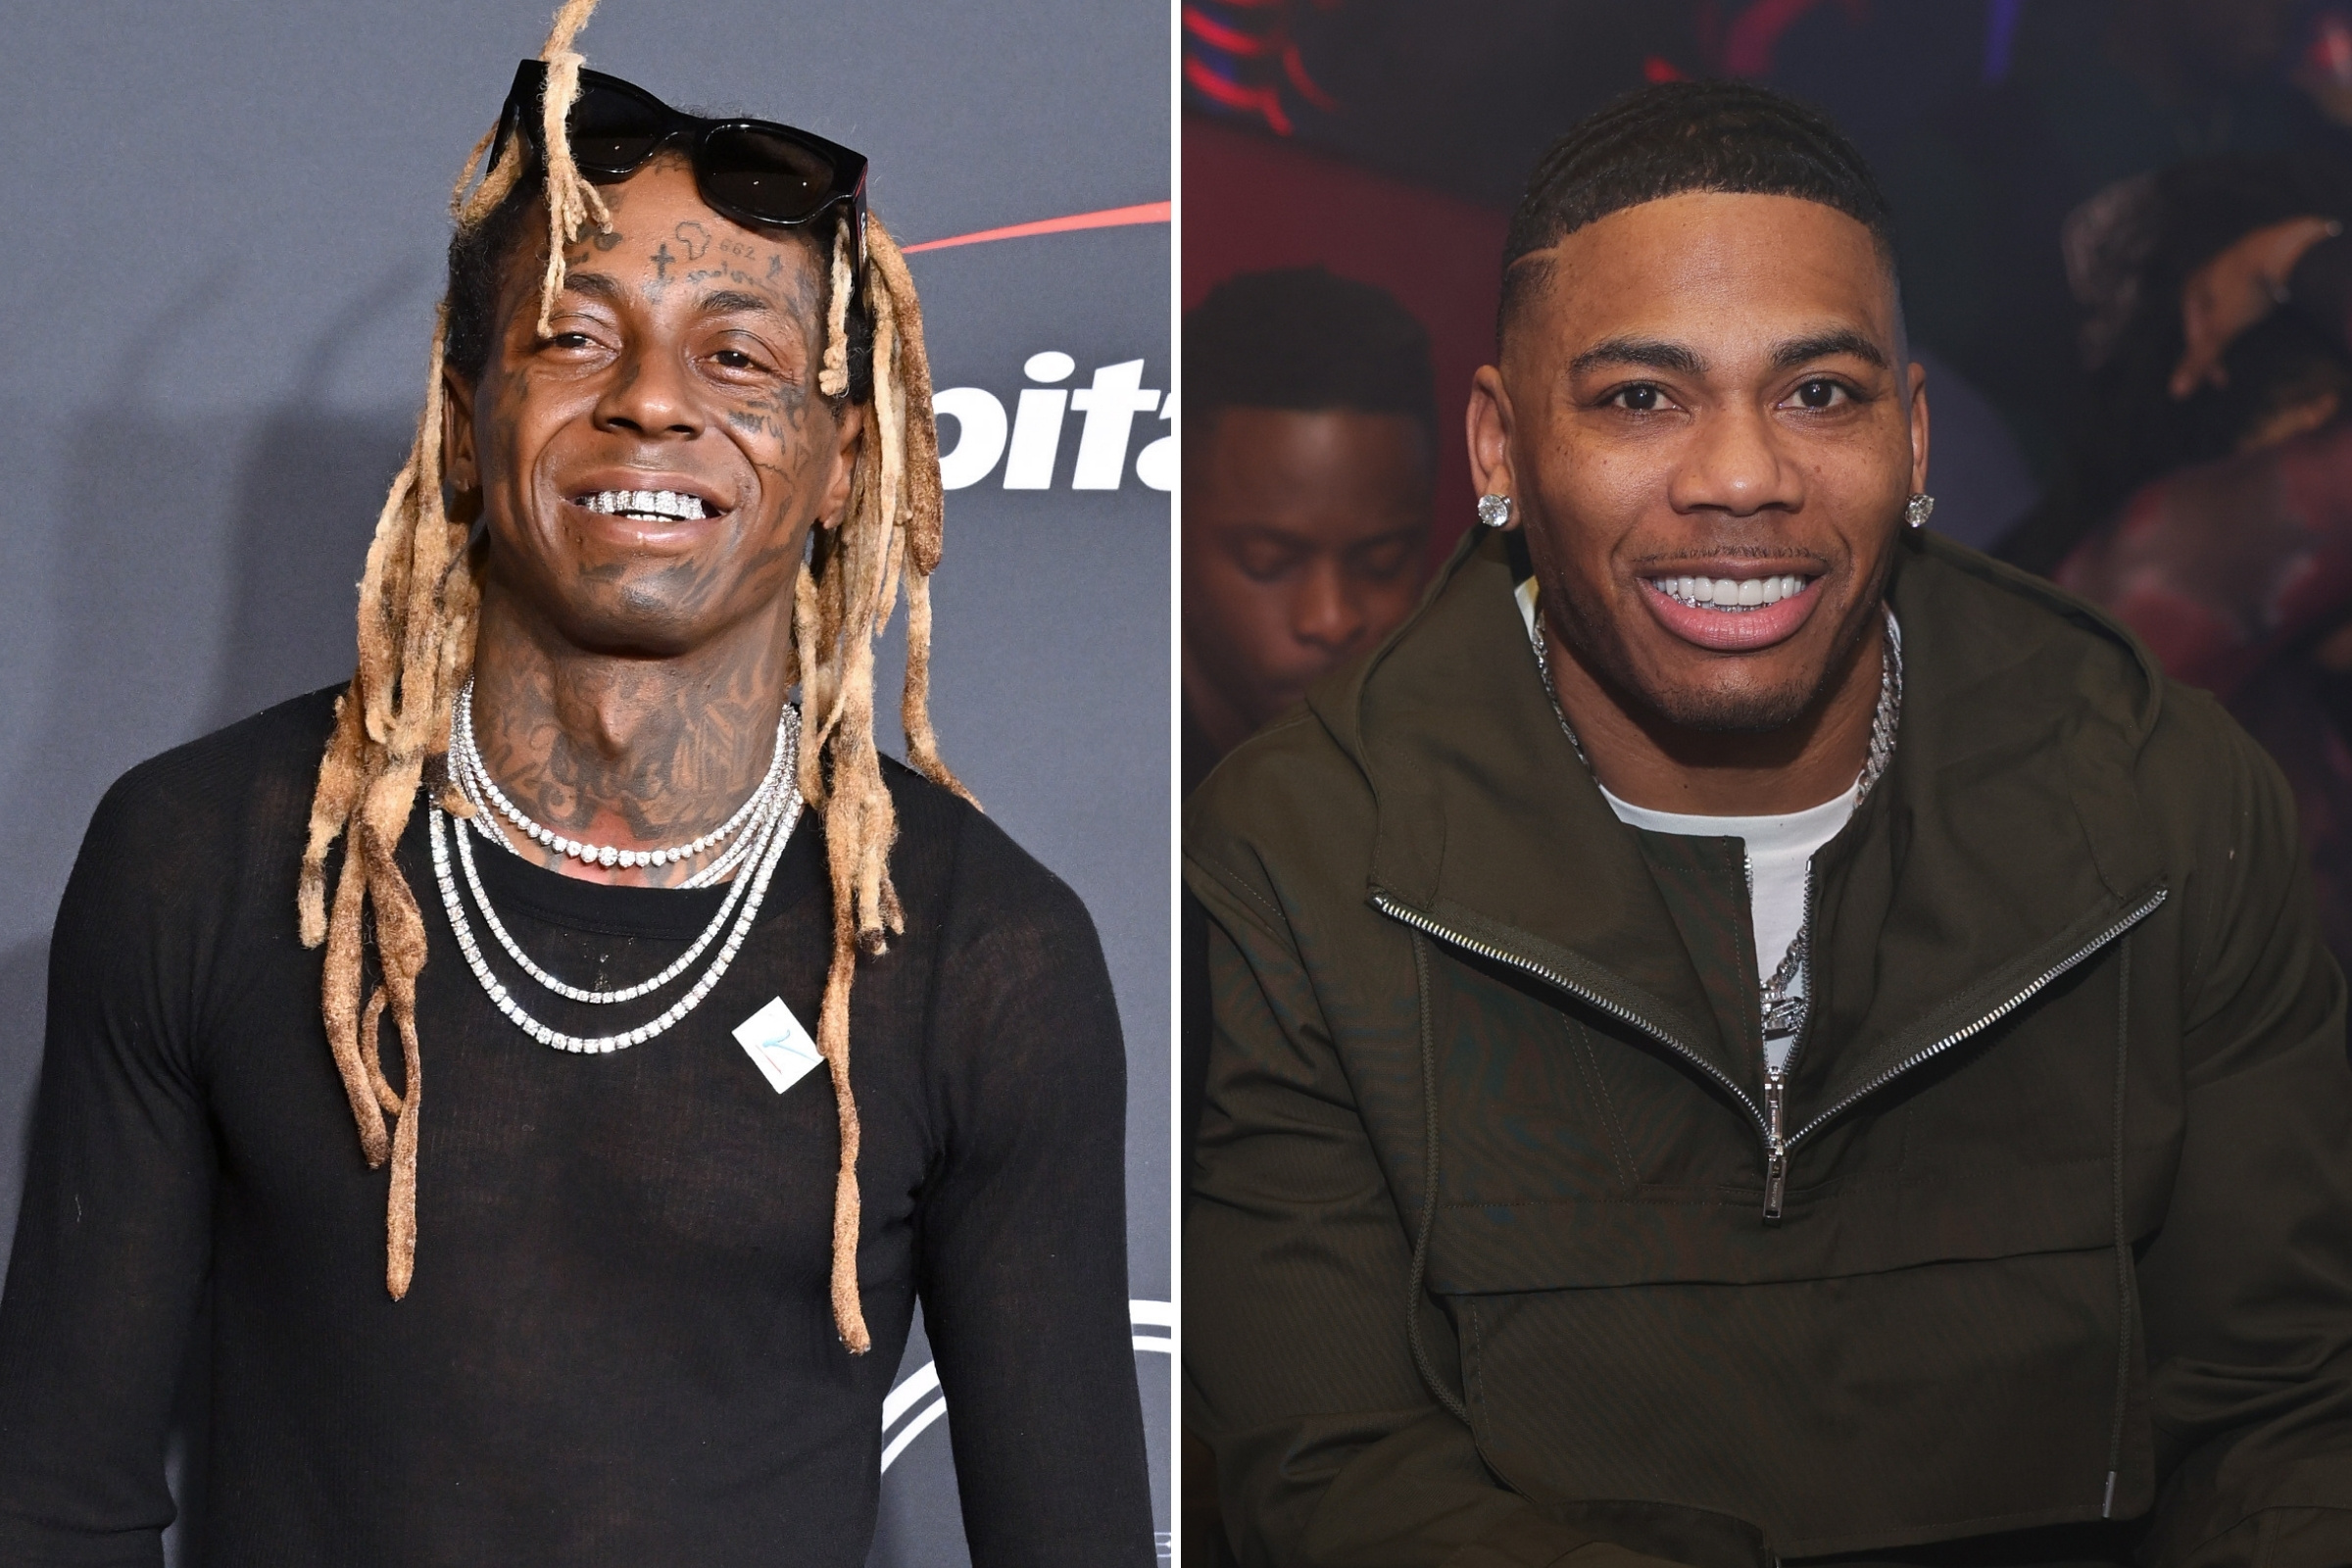 Nelly and Lil Wayne Fumble With Adorable Tech Issue During Instagram Live